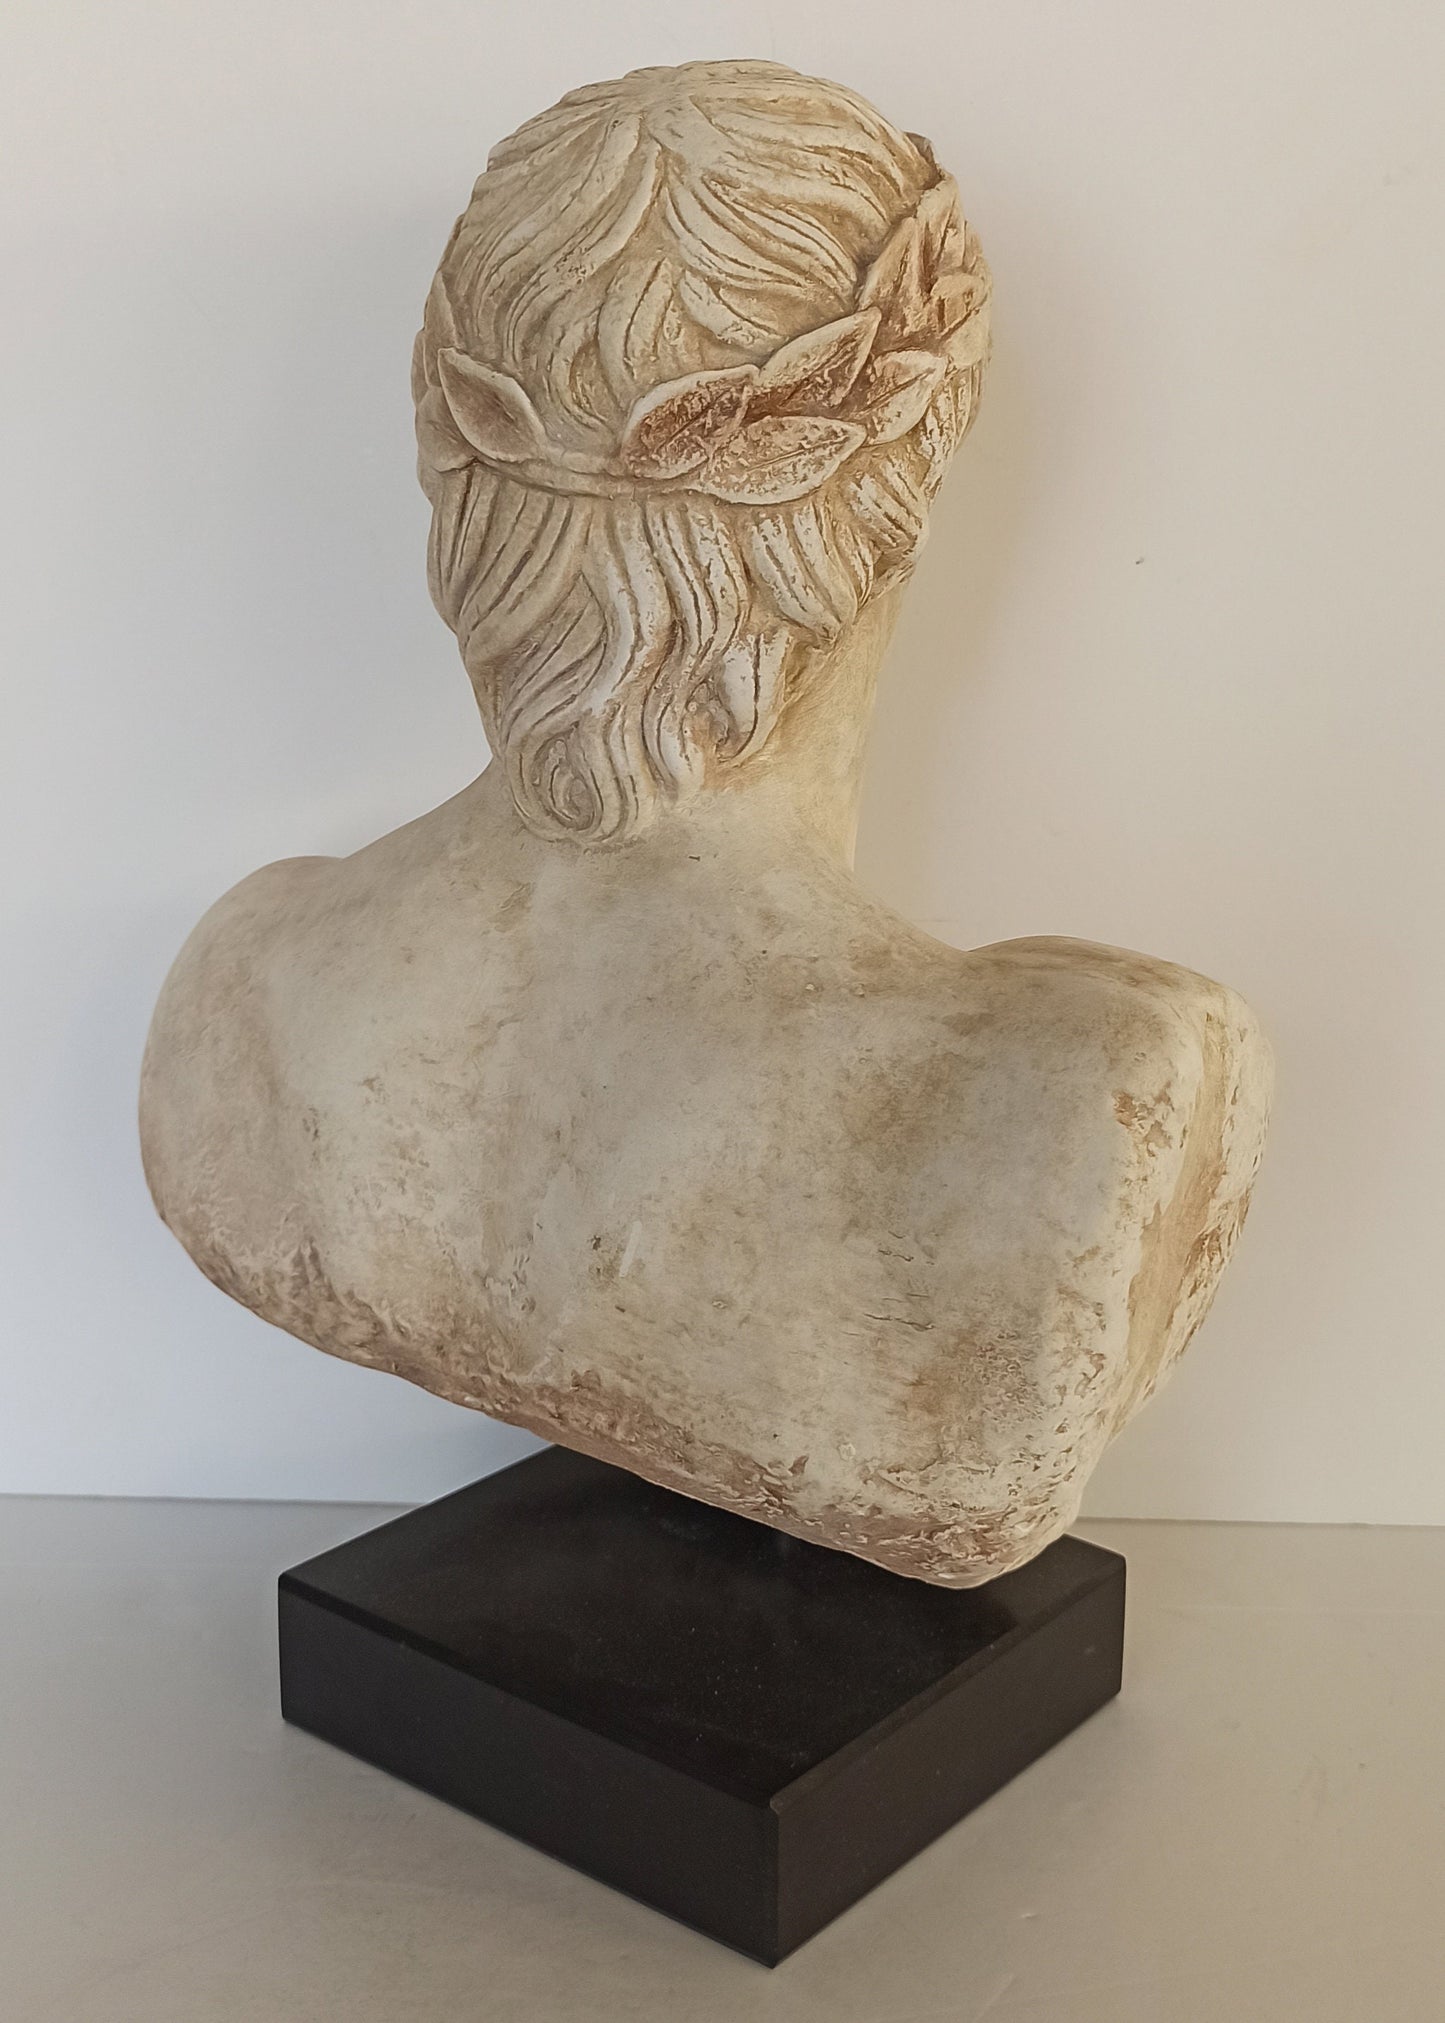 Apollo- God of Music,Poetry, Art, Prophecy, Truth, Archery, Plague, Healing, Sun and Light  - Marble Base - Head Bust - Casting Stone